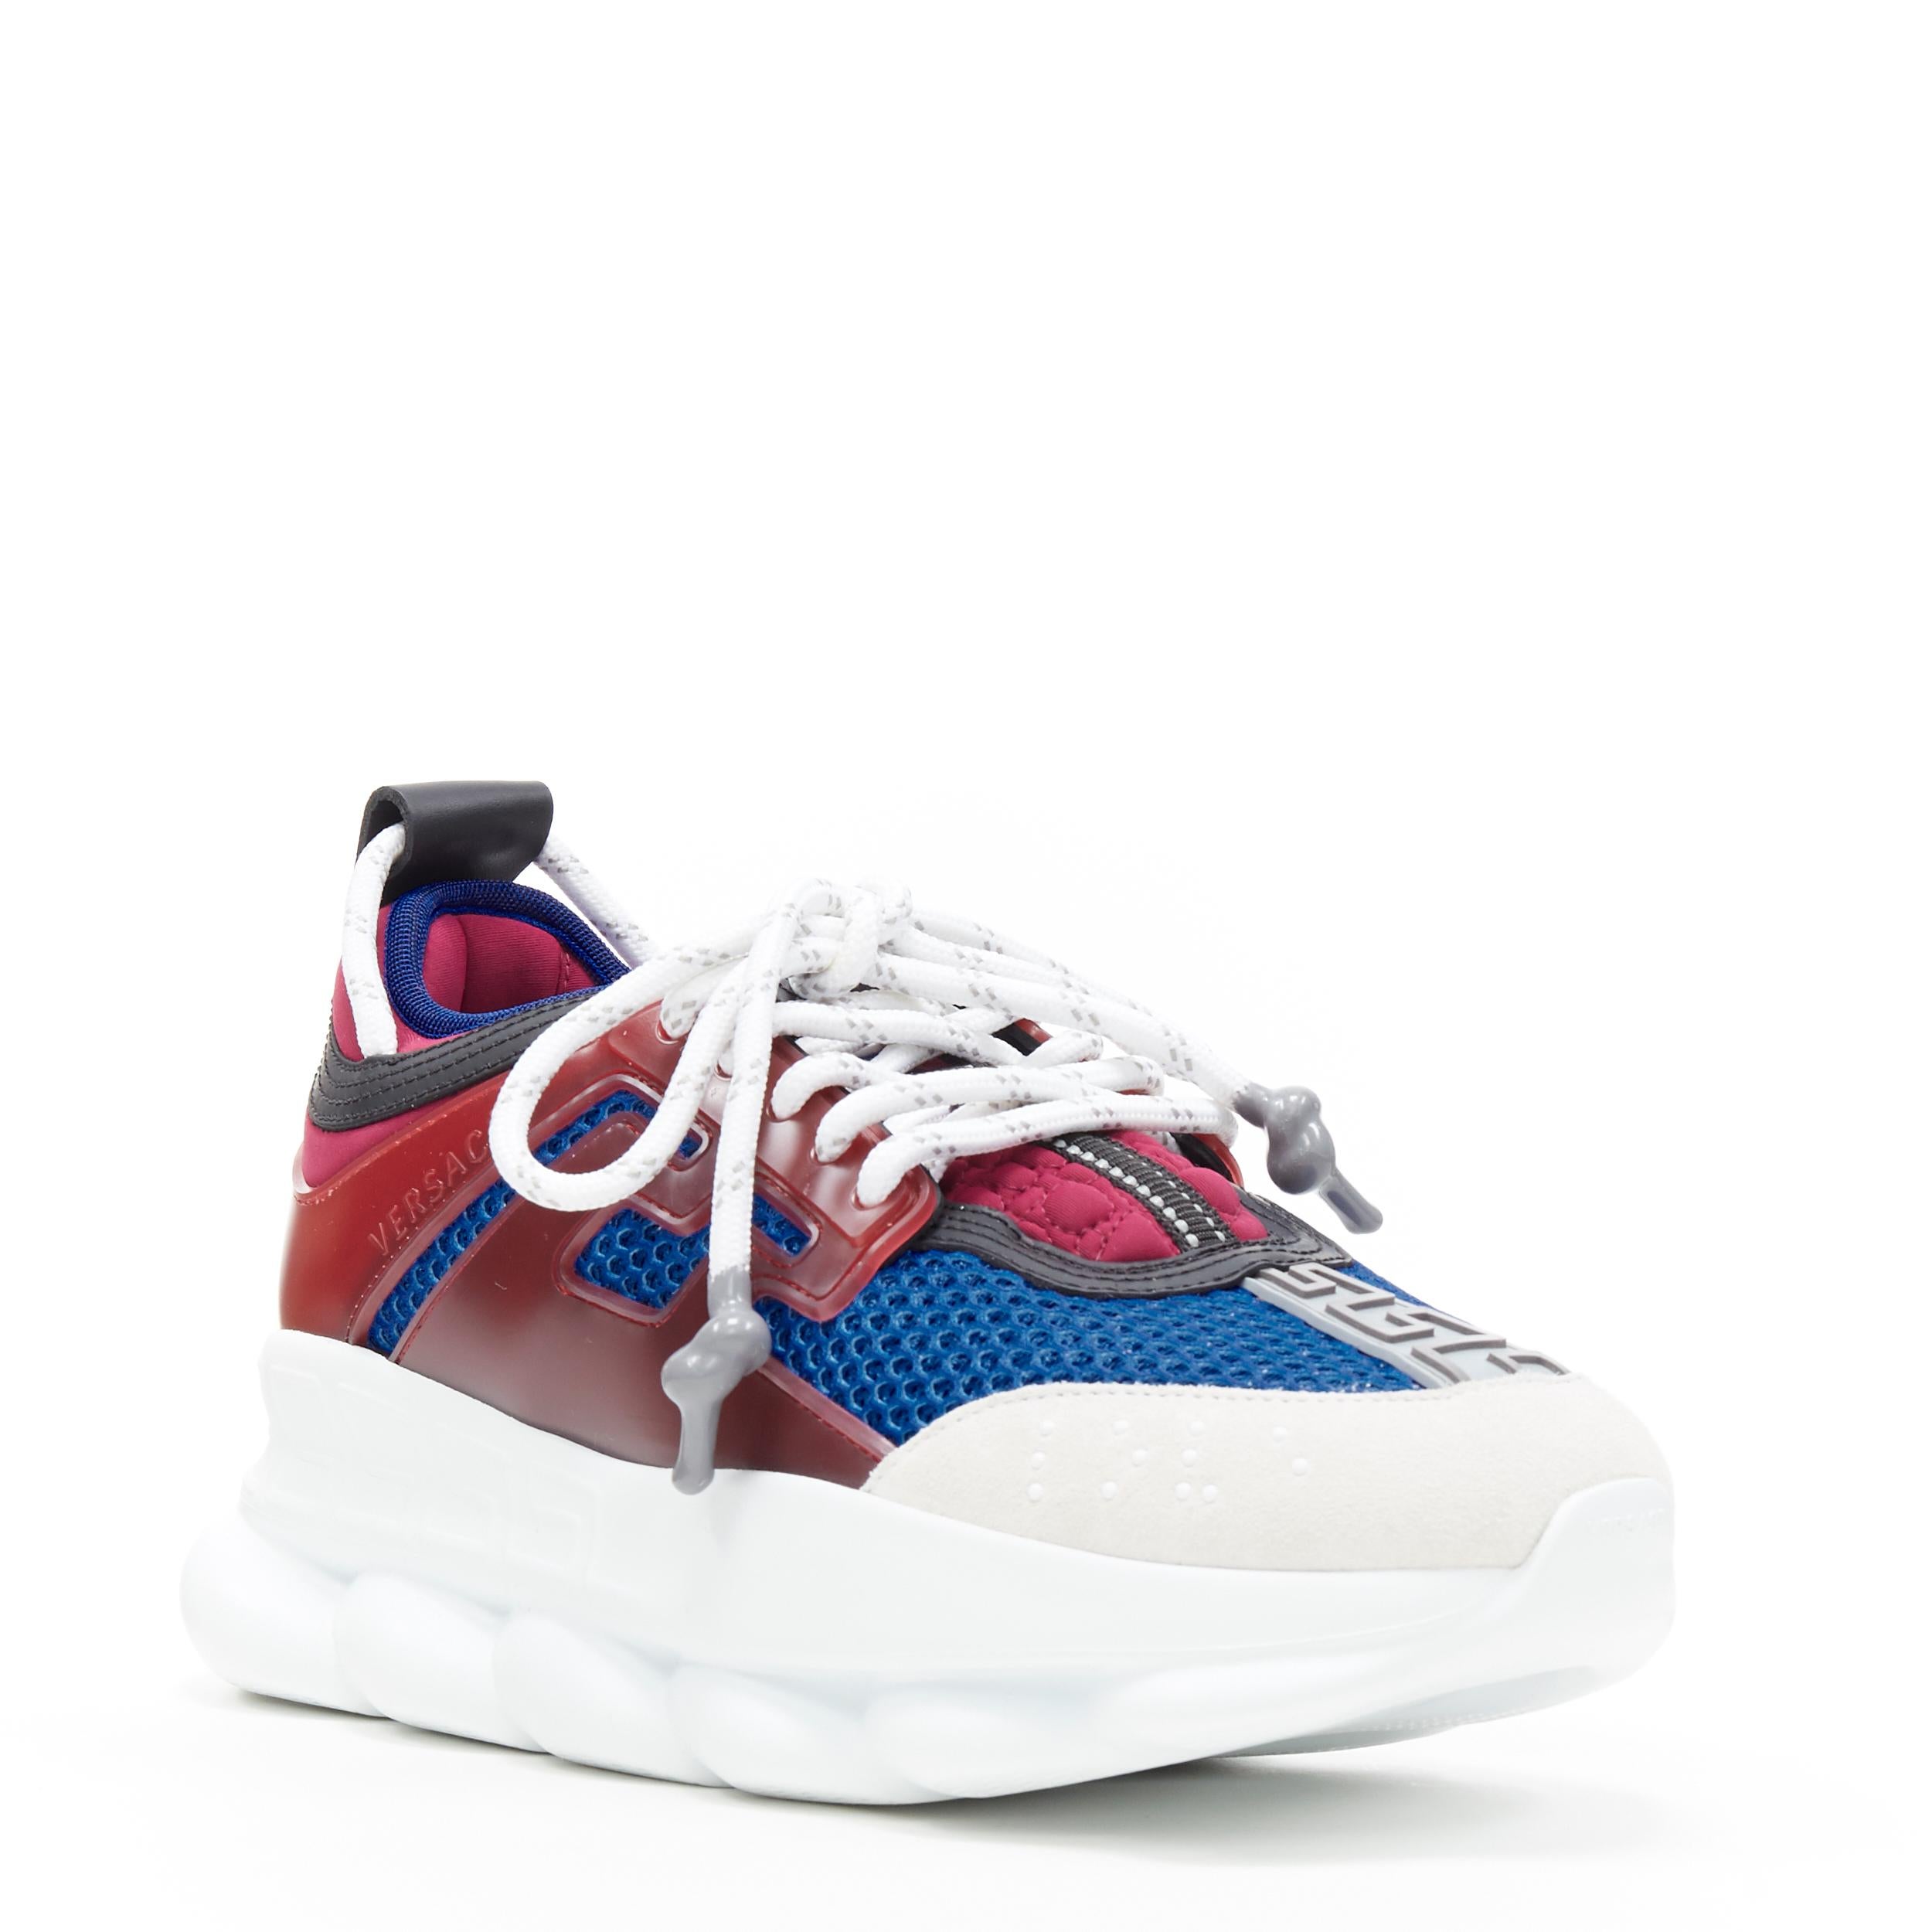 new VERSACE Chain Reaction burgundy grey suede blue mesh chunky dad sneaker EU37
Brand: Versace
Designer: Donatella Versace
Collection: 2019
Model Name / Style: Chain Reaction
Material: Fabric
Color: Multicolour
Pattern: Solid
Closure: Lace up
Extra